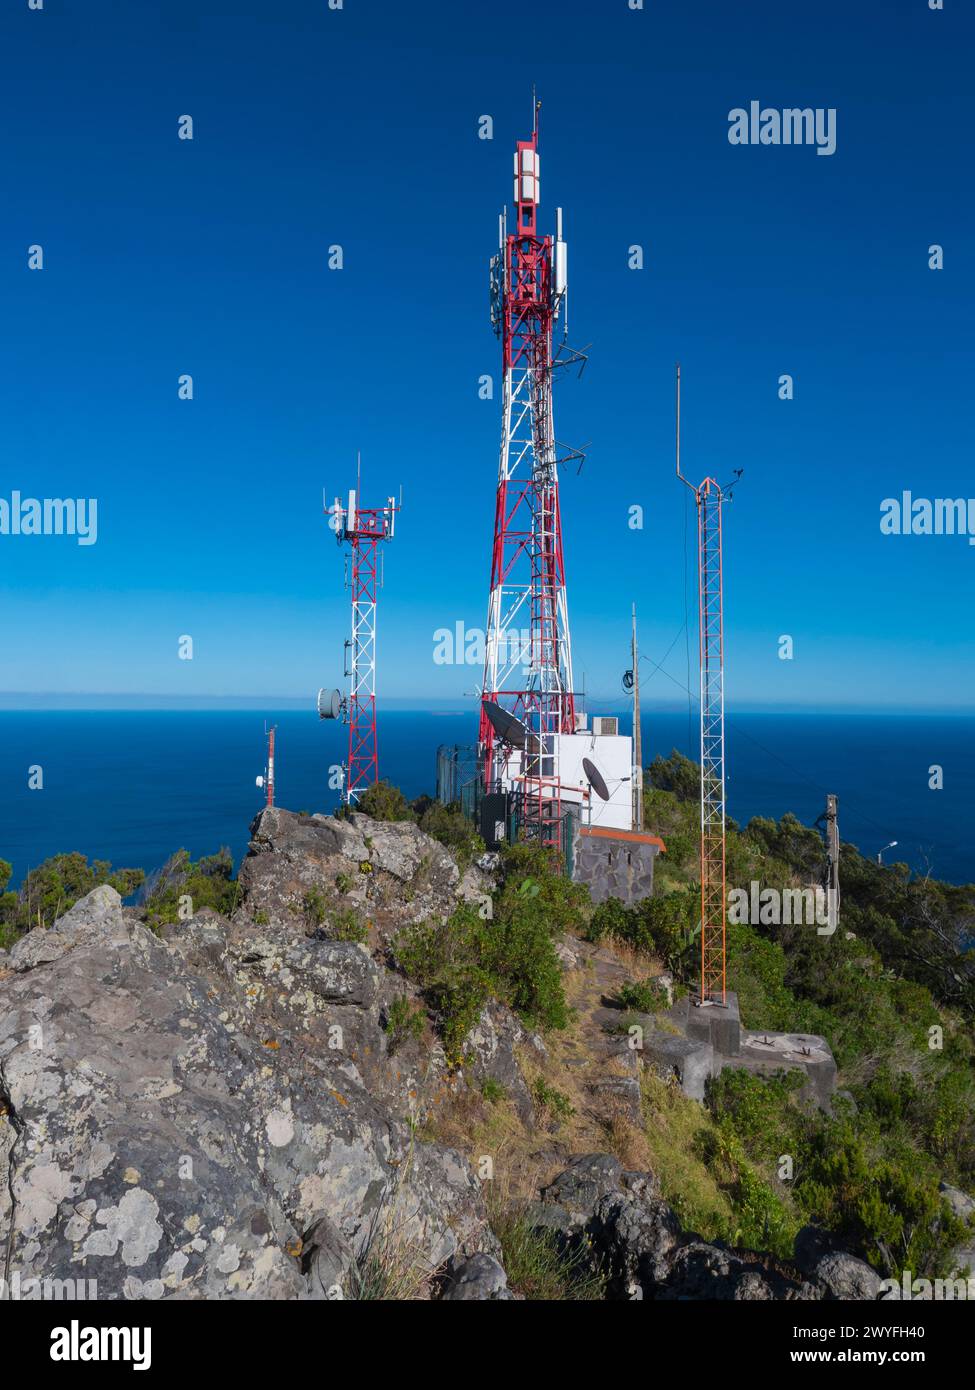 Telecommunication tower with antennas and blue sky background at Pico do Facho hill viewpoint, Machico, Madeira, Portugal Stock Photo